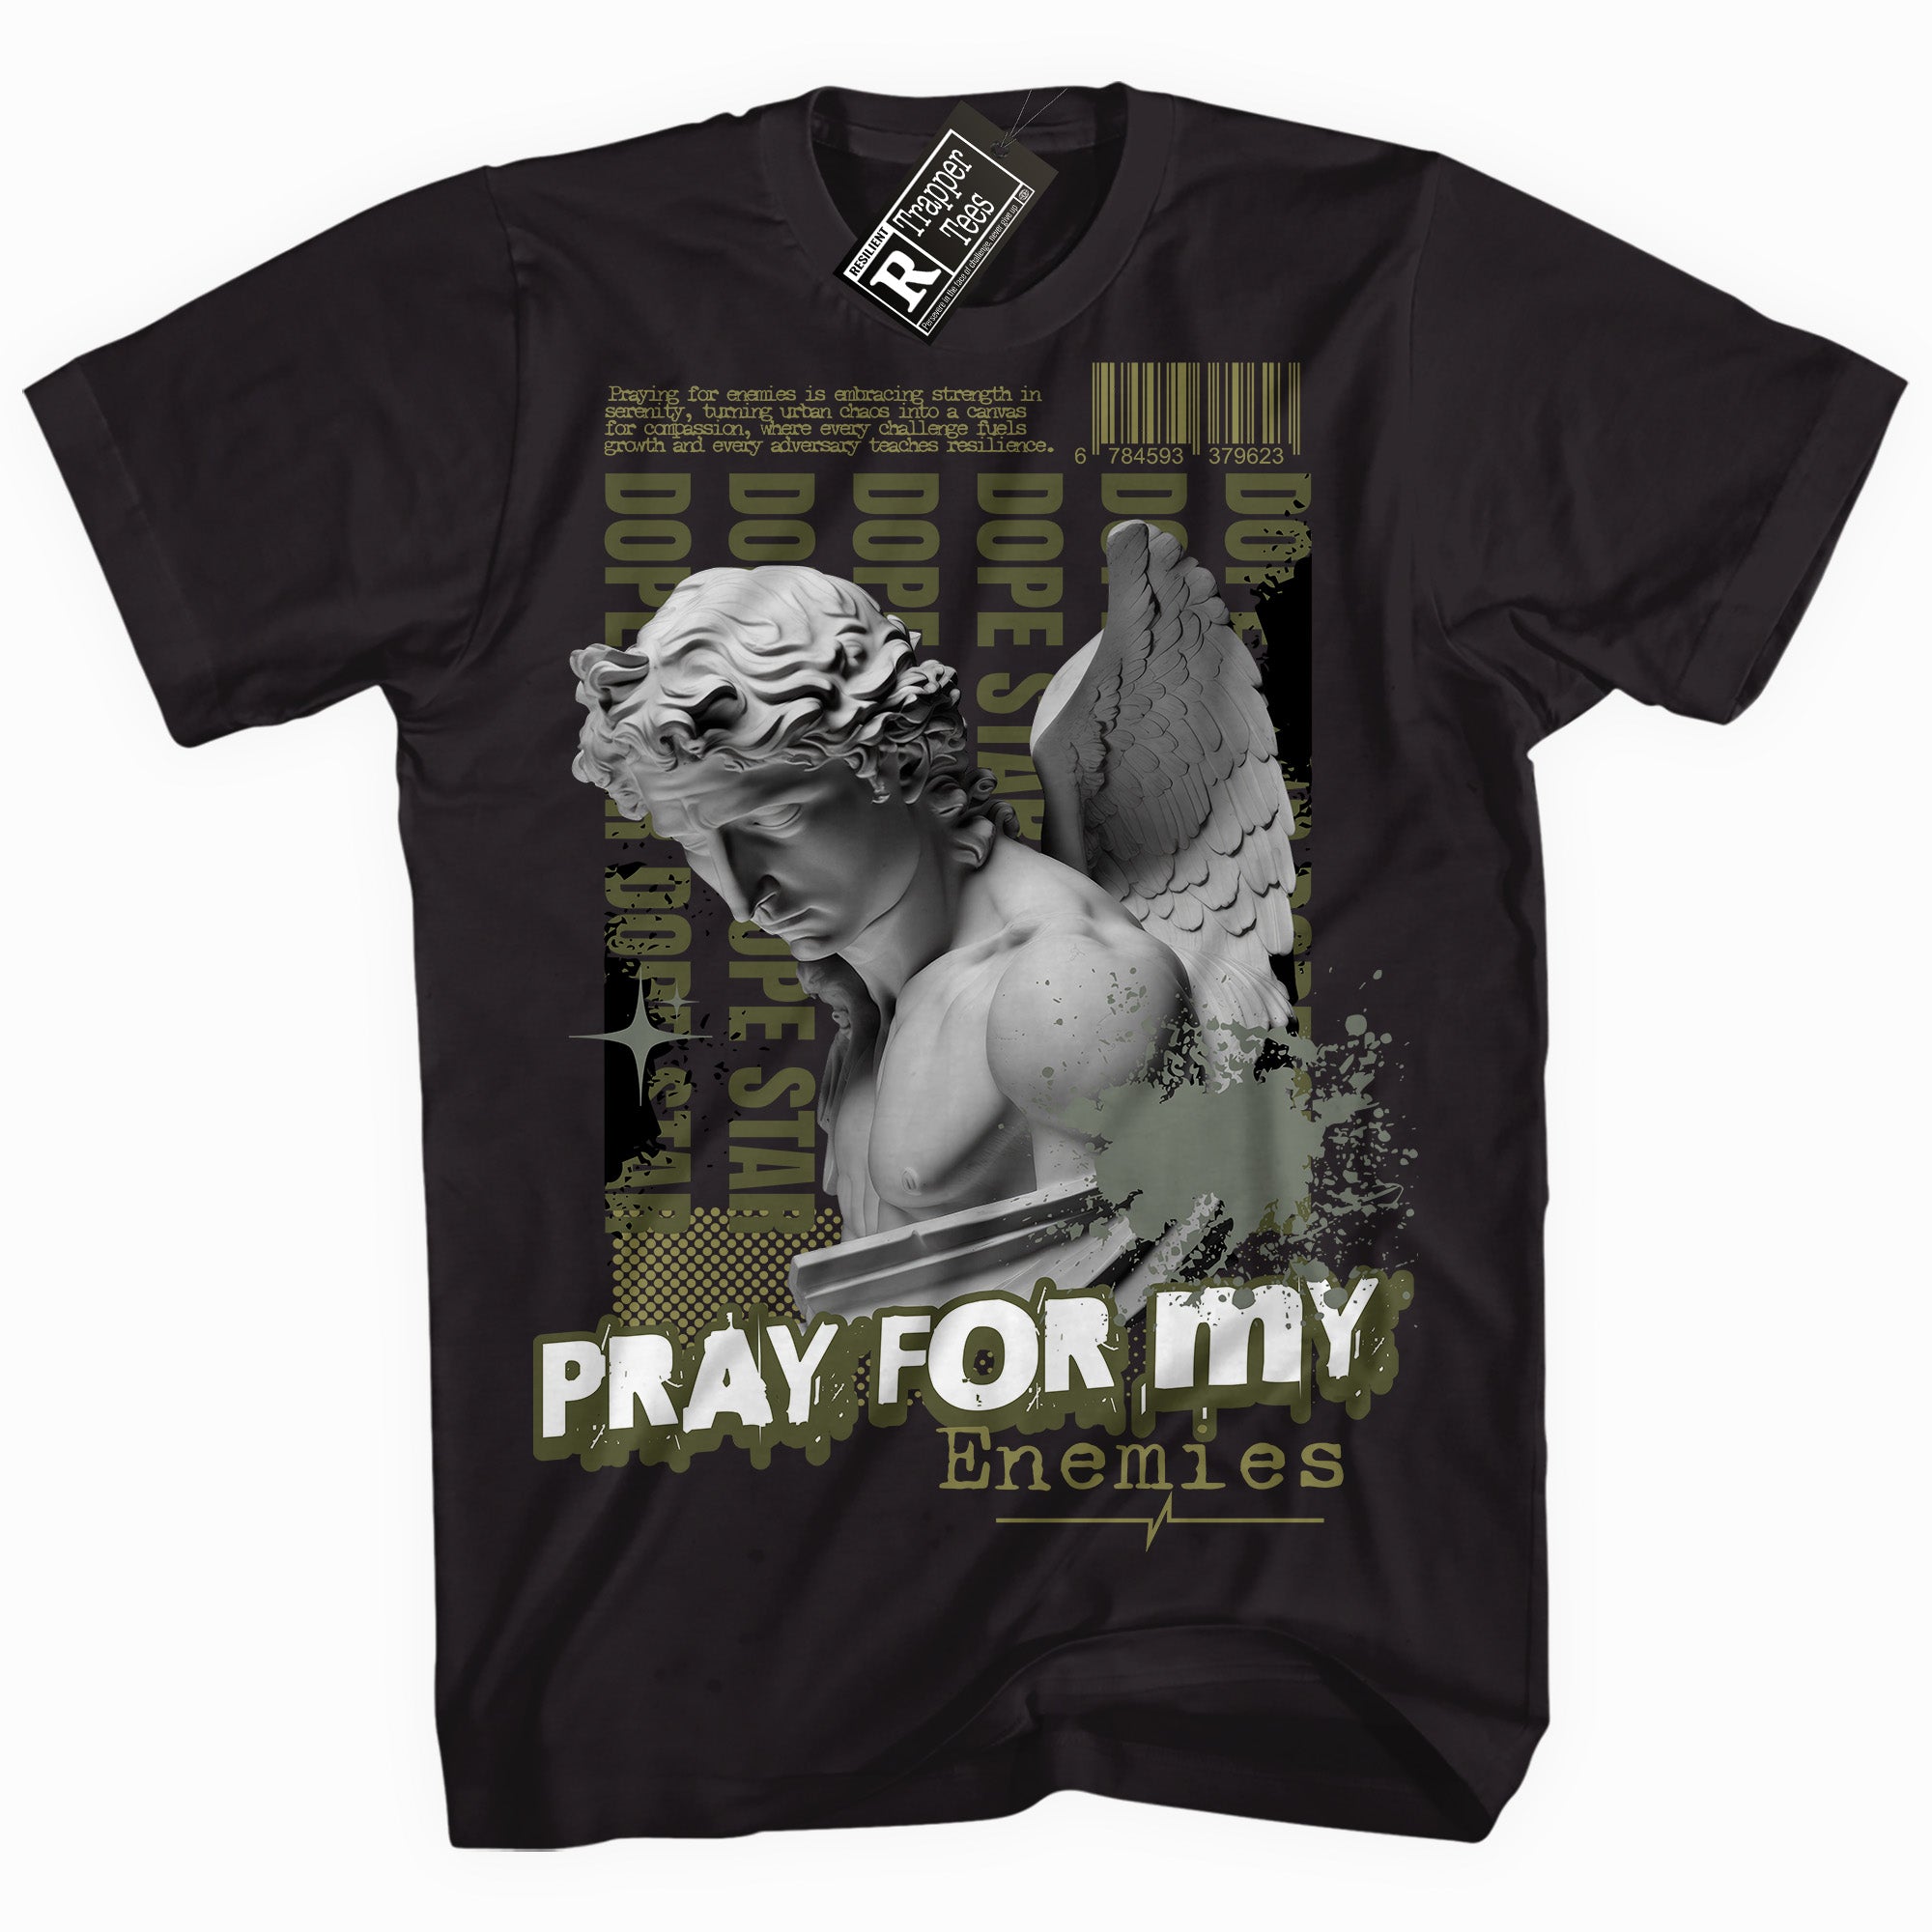 Cool Black graphic tee with “ Pray Enemies ” print, that perfectly matches Craft Olive 4s sneakers